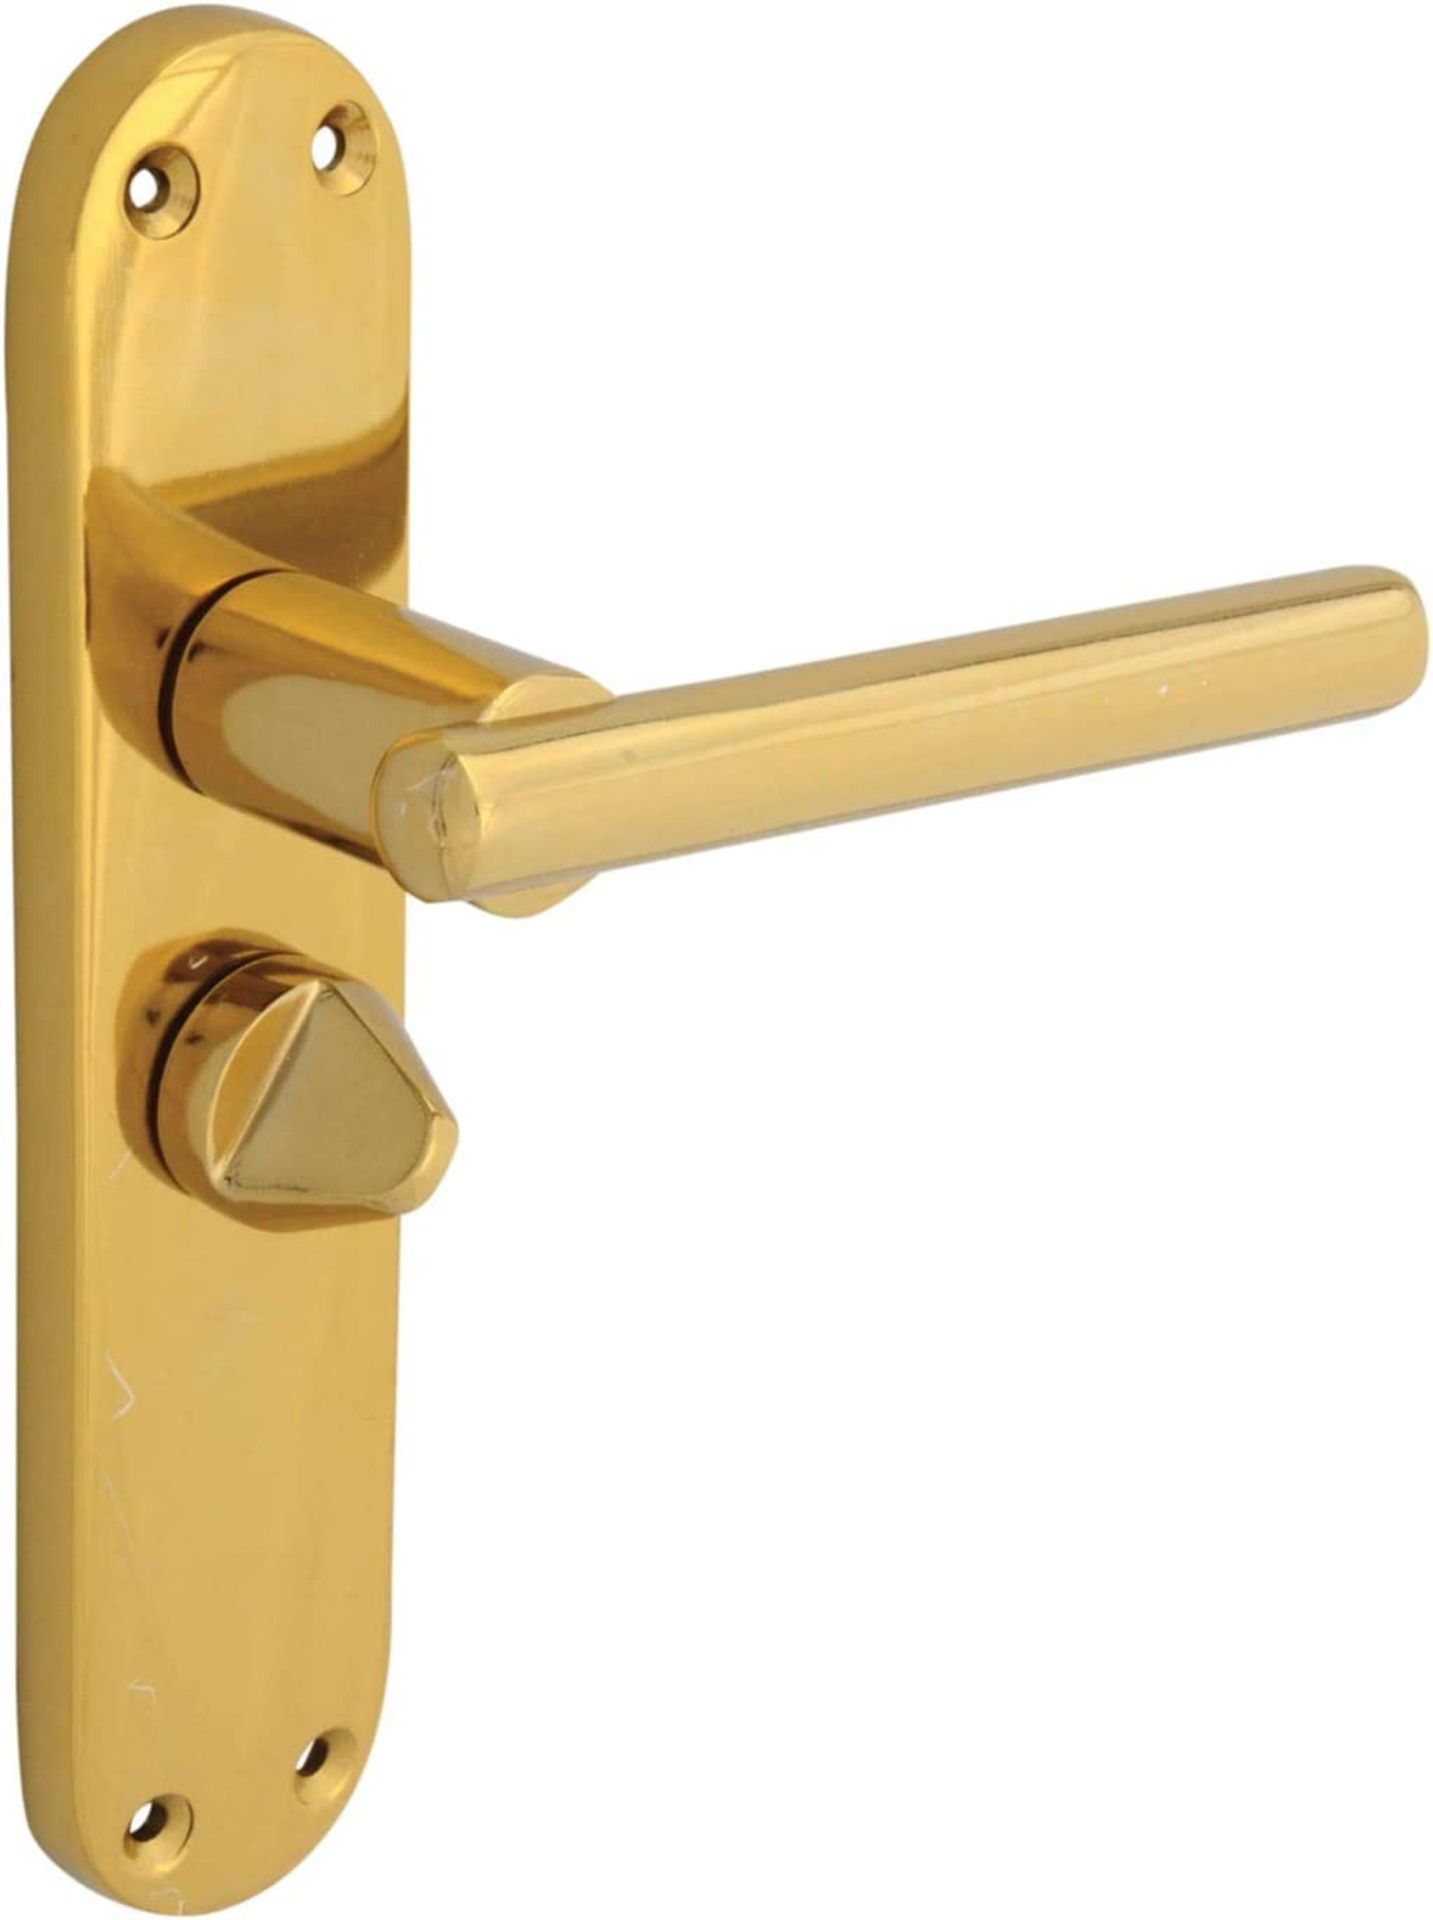 9 Sets Forge Modular Brass Privacy Lever Handles on Backplate FGEHPRIMODBR RRP £19.99 per set - Image 3 of 3